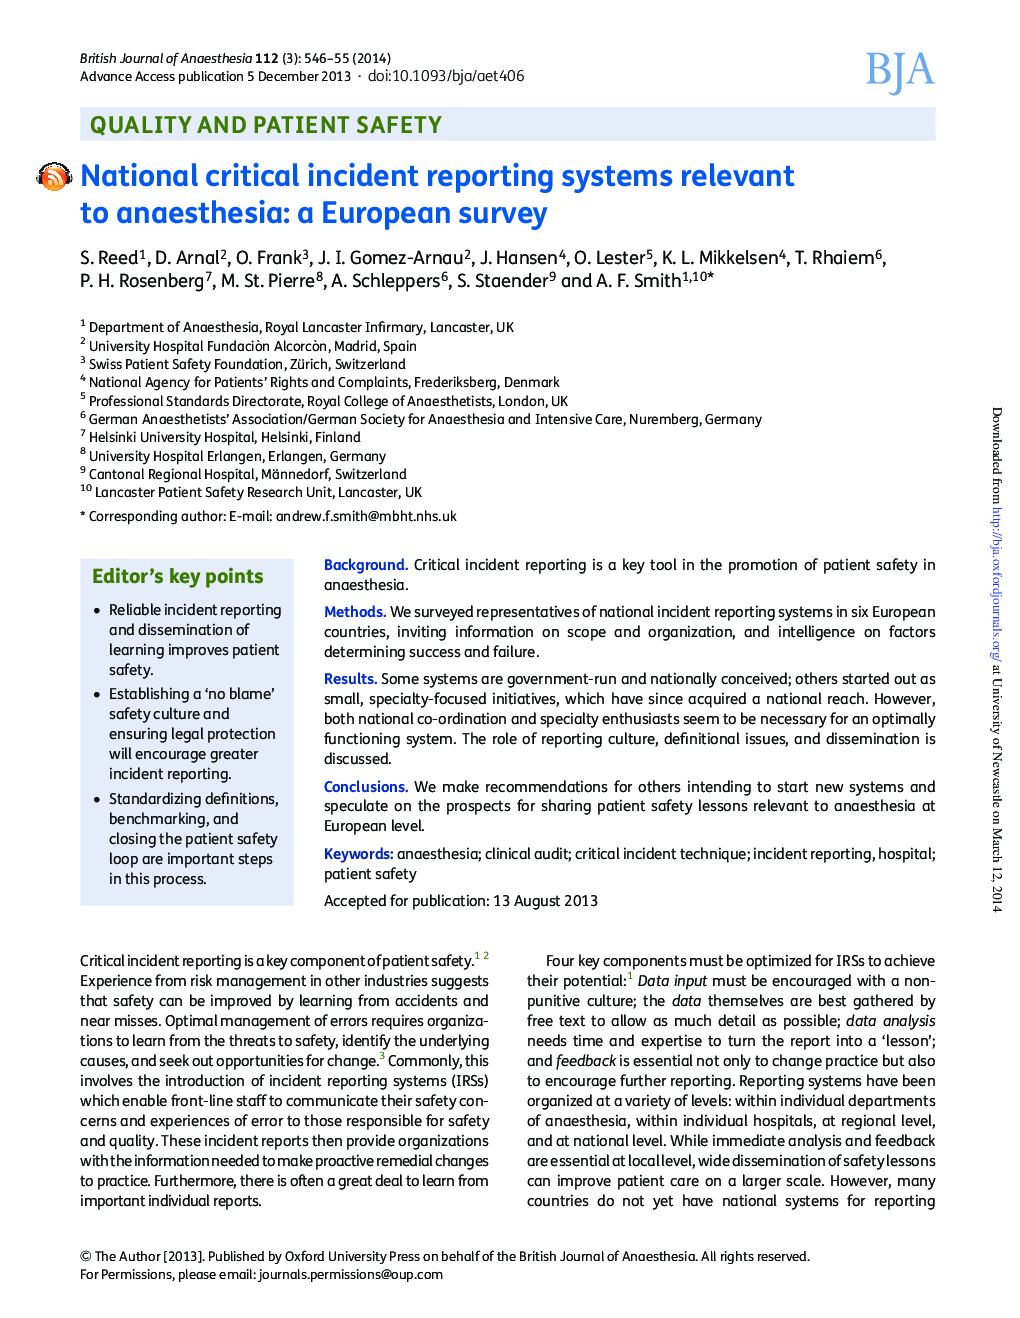 National critical incident reporting systems relevant to anaesthesia: a European survey